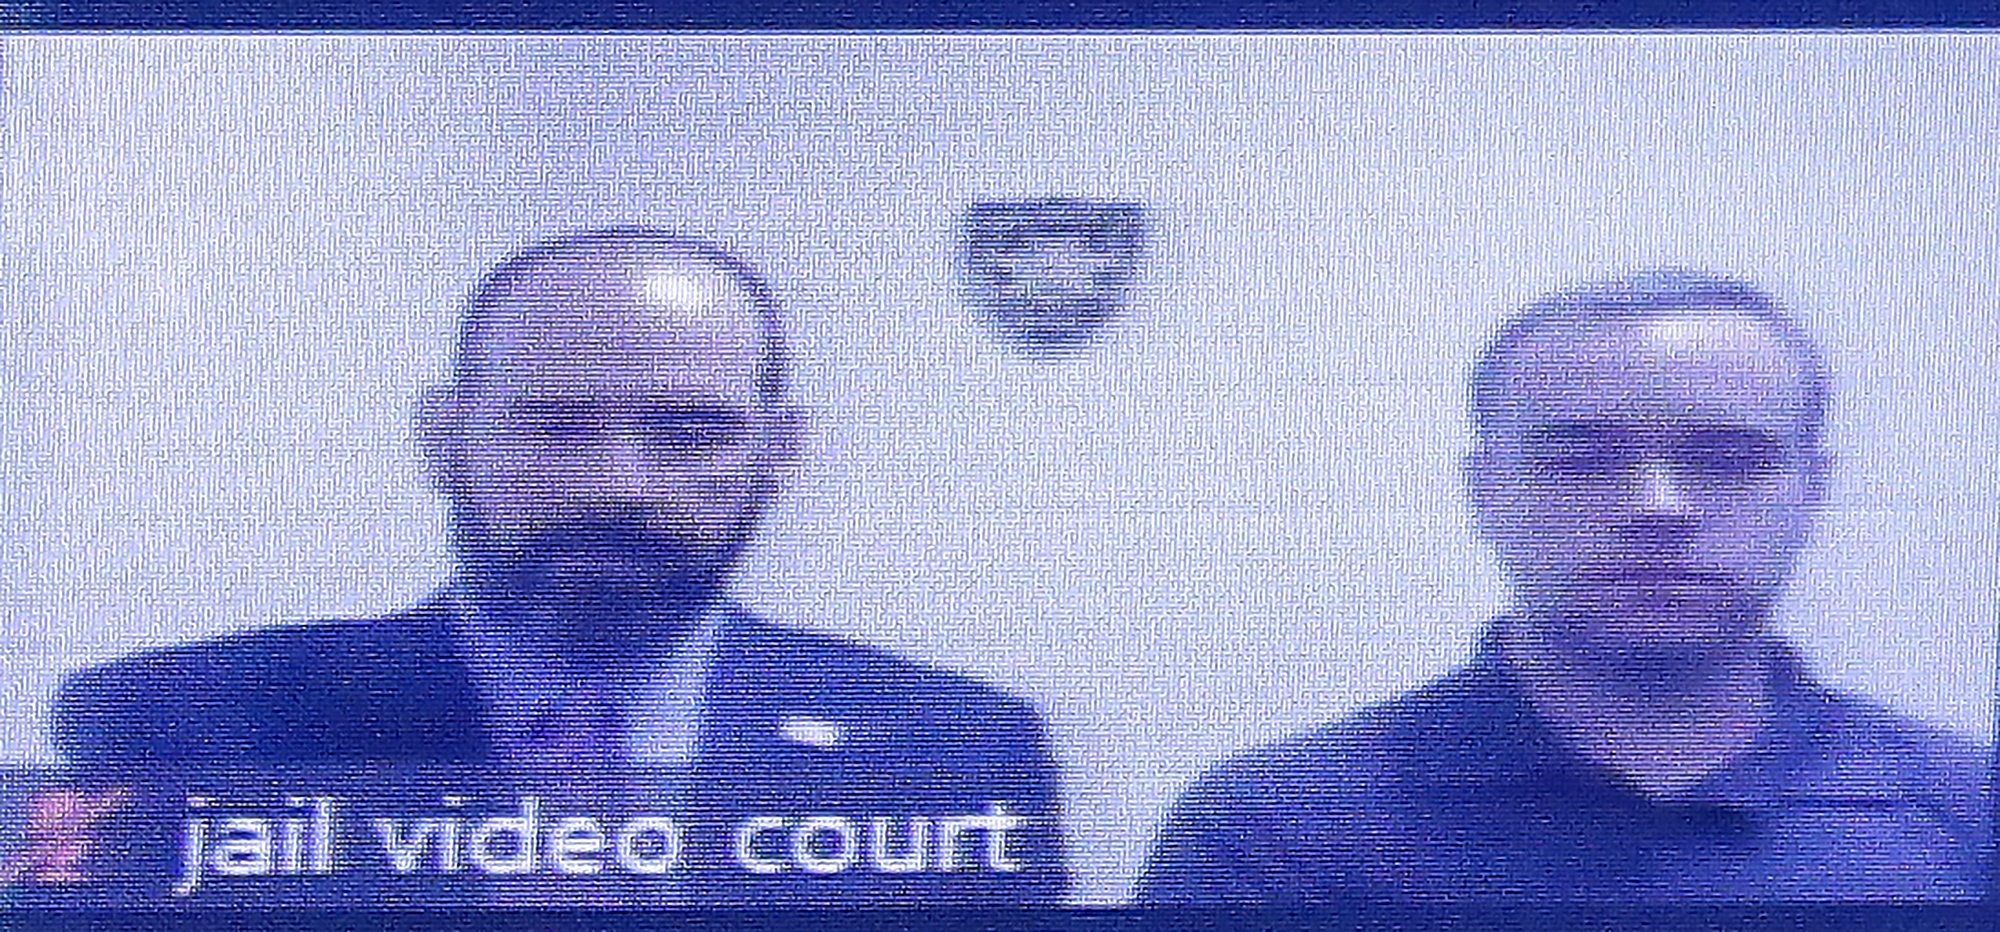 PHOTO: Former Atlanta police Officer Garrett Rolfe, right, appears on a television screen with attorney Lance LoRusso, June 30, 2020, in Atlanta.